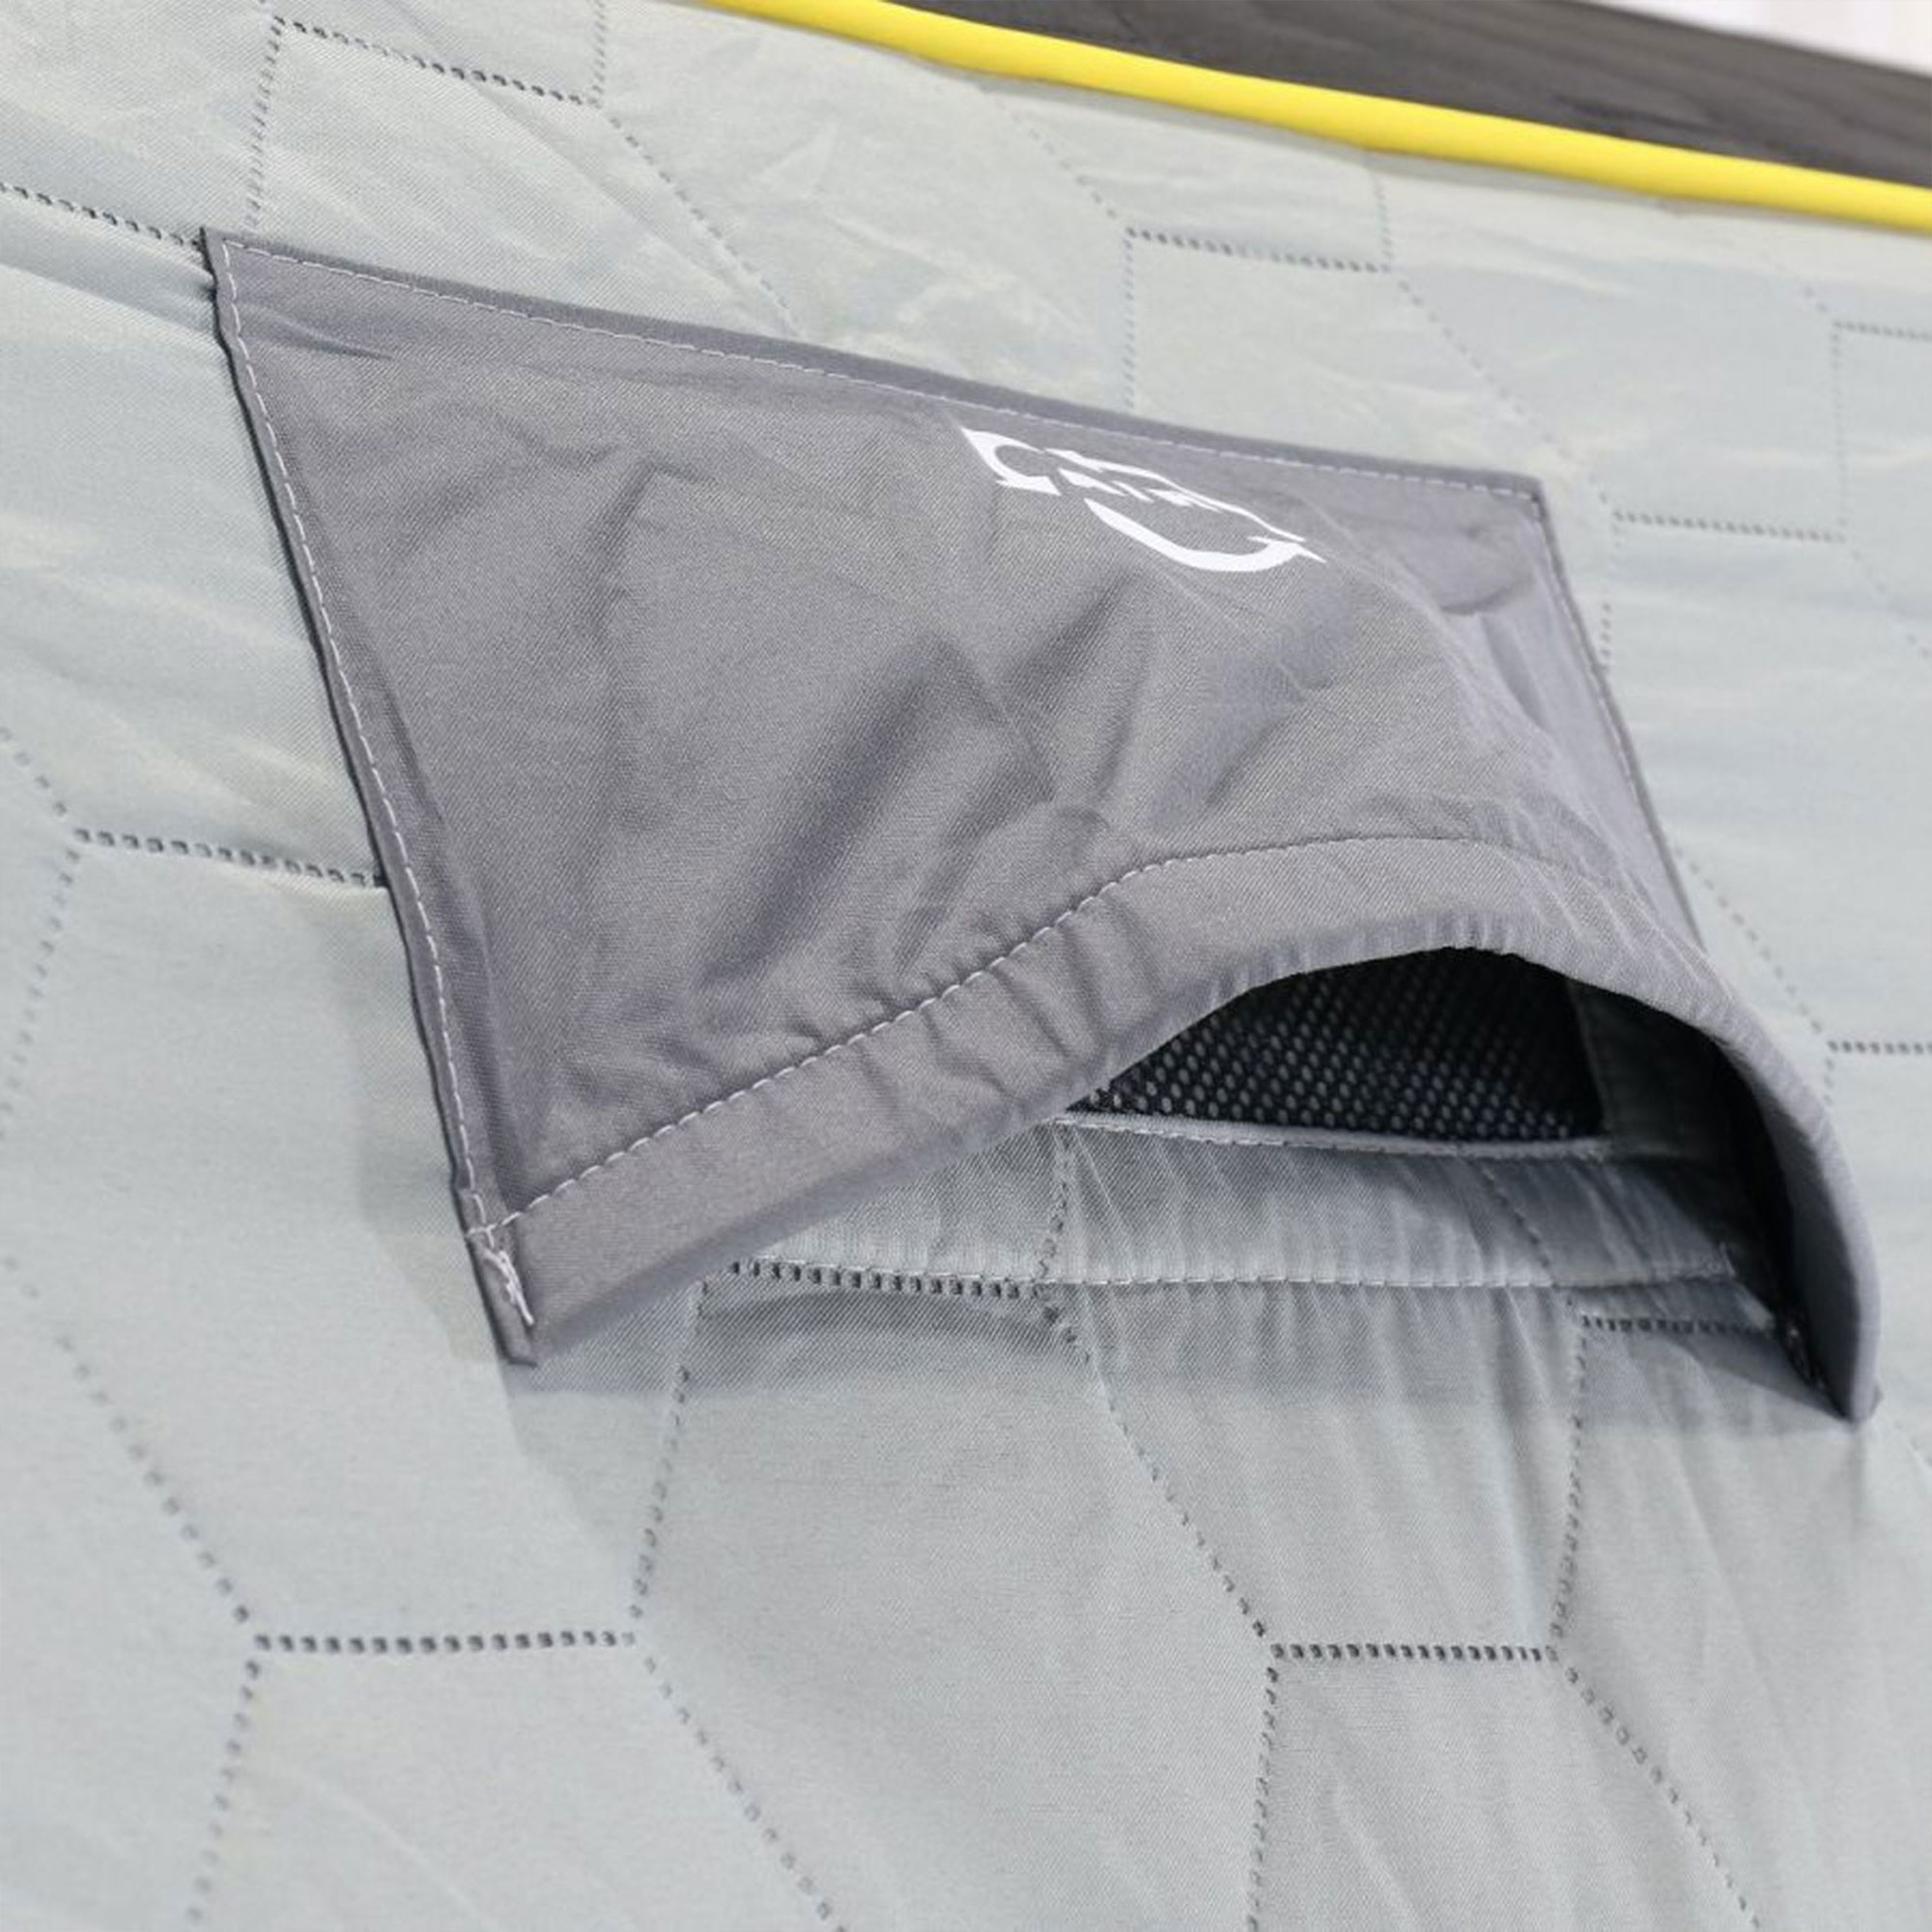 CLAM Portable 9 Foot Jason Mitchell X5000 Ice Fish Thermal Hub Shelter Tent - image 4 of 11